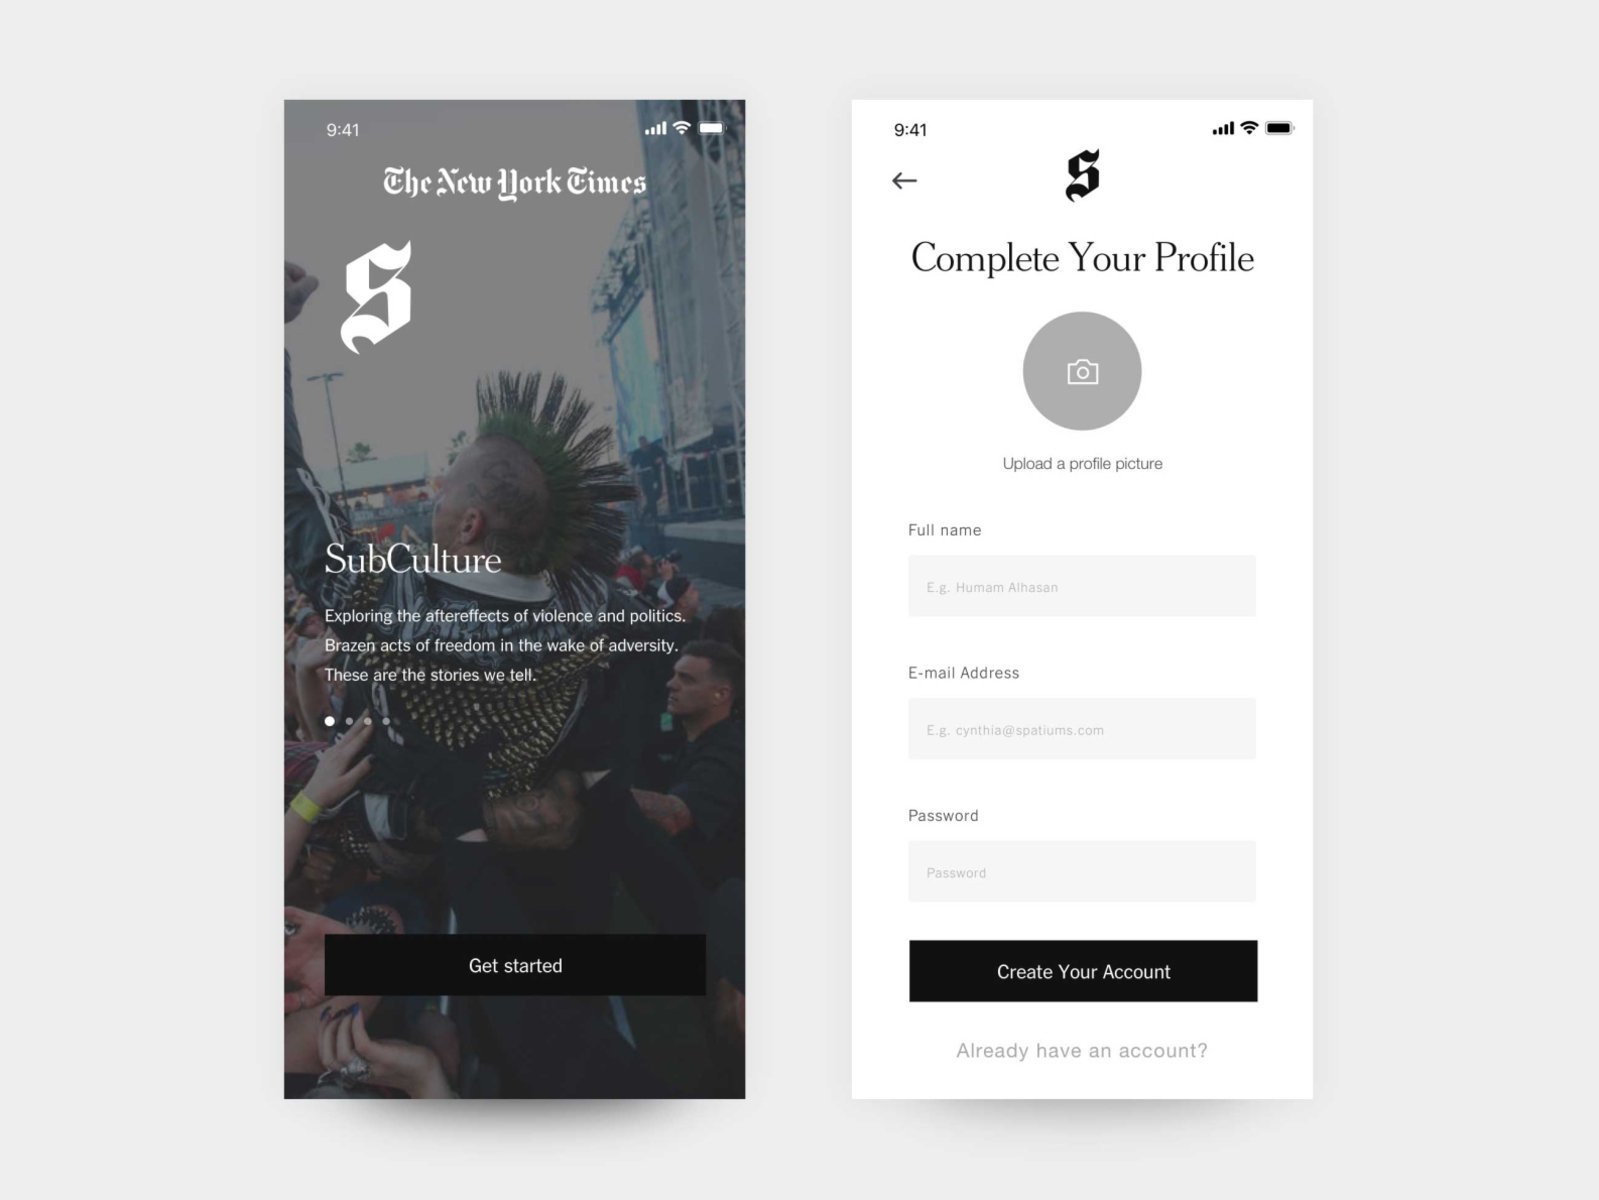 The New York Times Times Subculture App Login by Jillian Hobbs on Dribbble